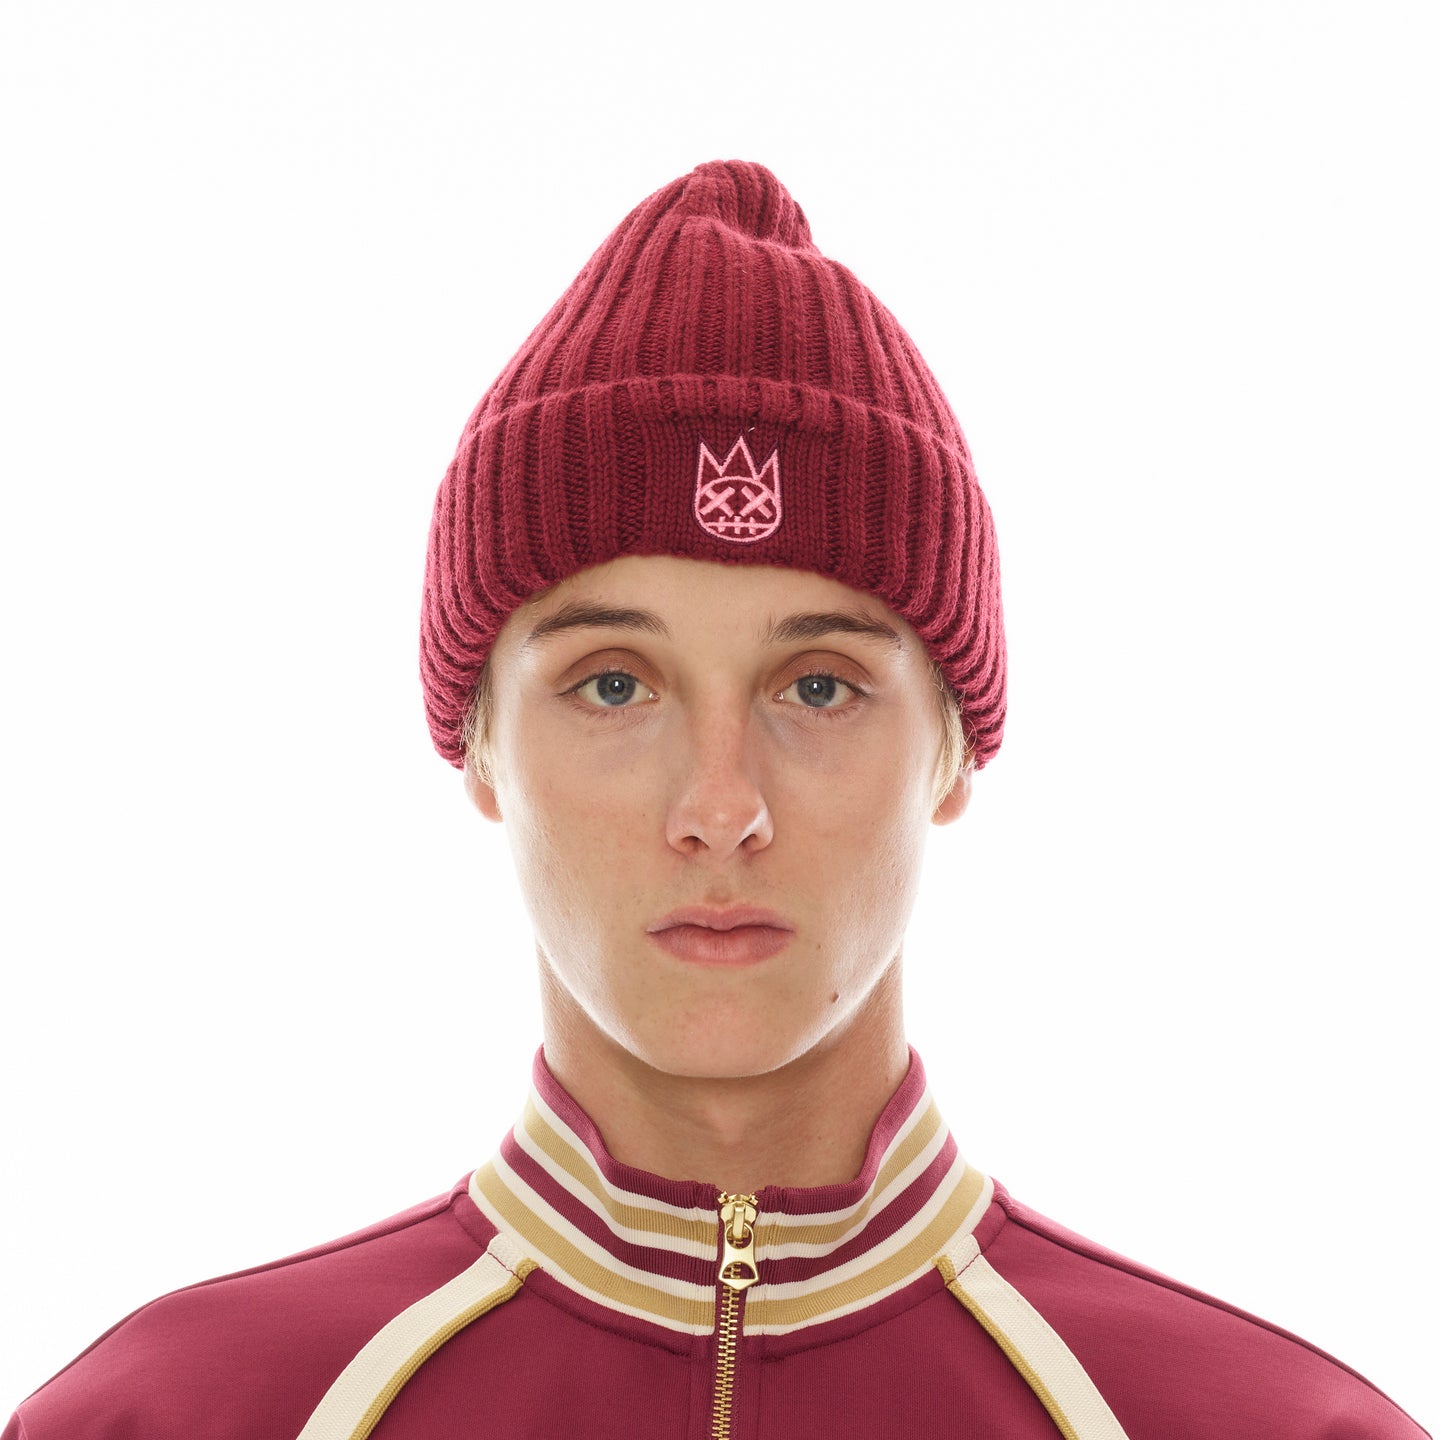 KNIT HAT WITH CLEAN 2 TONE SHIMUCHAN LOGO IN CABERNET